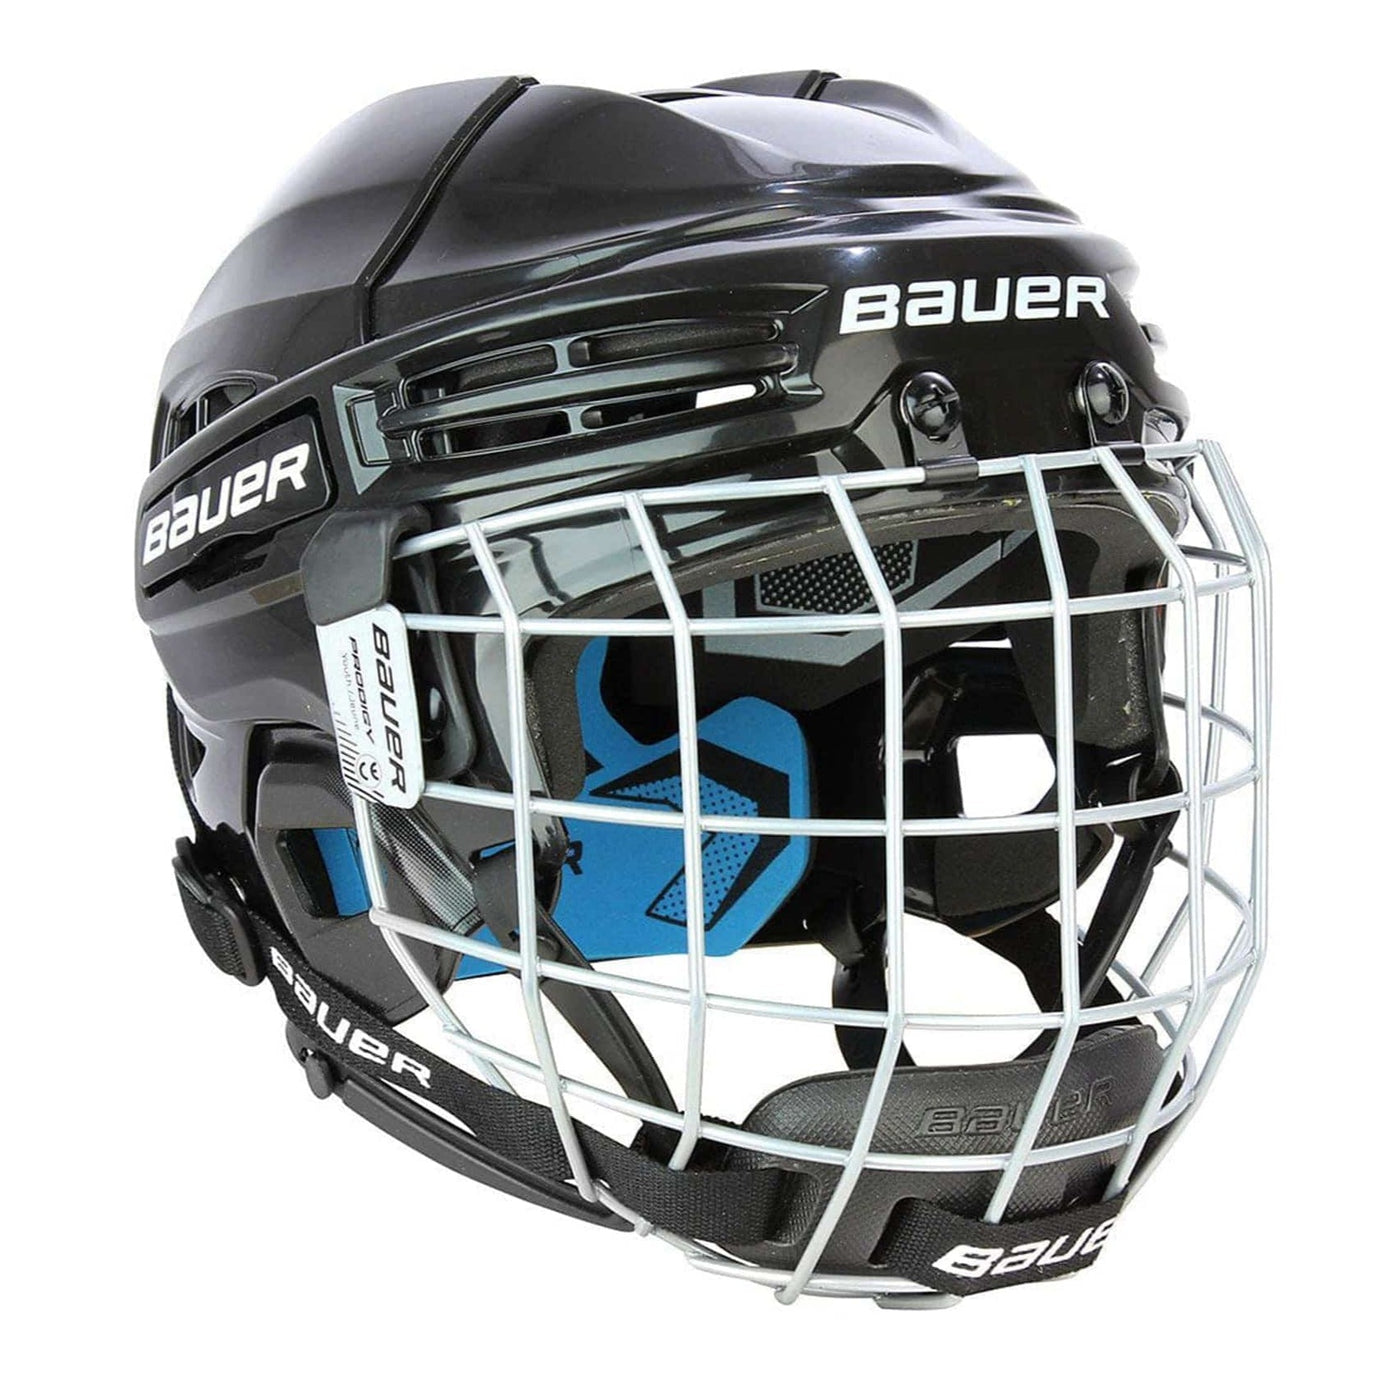 Bauer Prodigy Youth Hockey Helmet / Cage Combo - The Hockey Shop Source For Sports